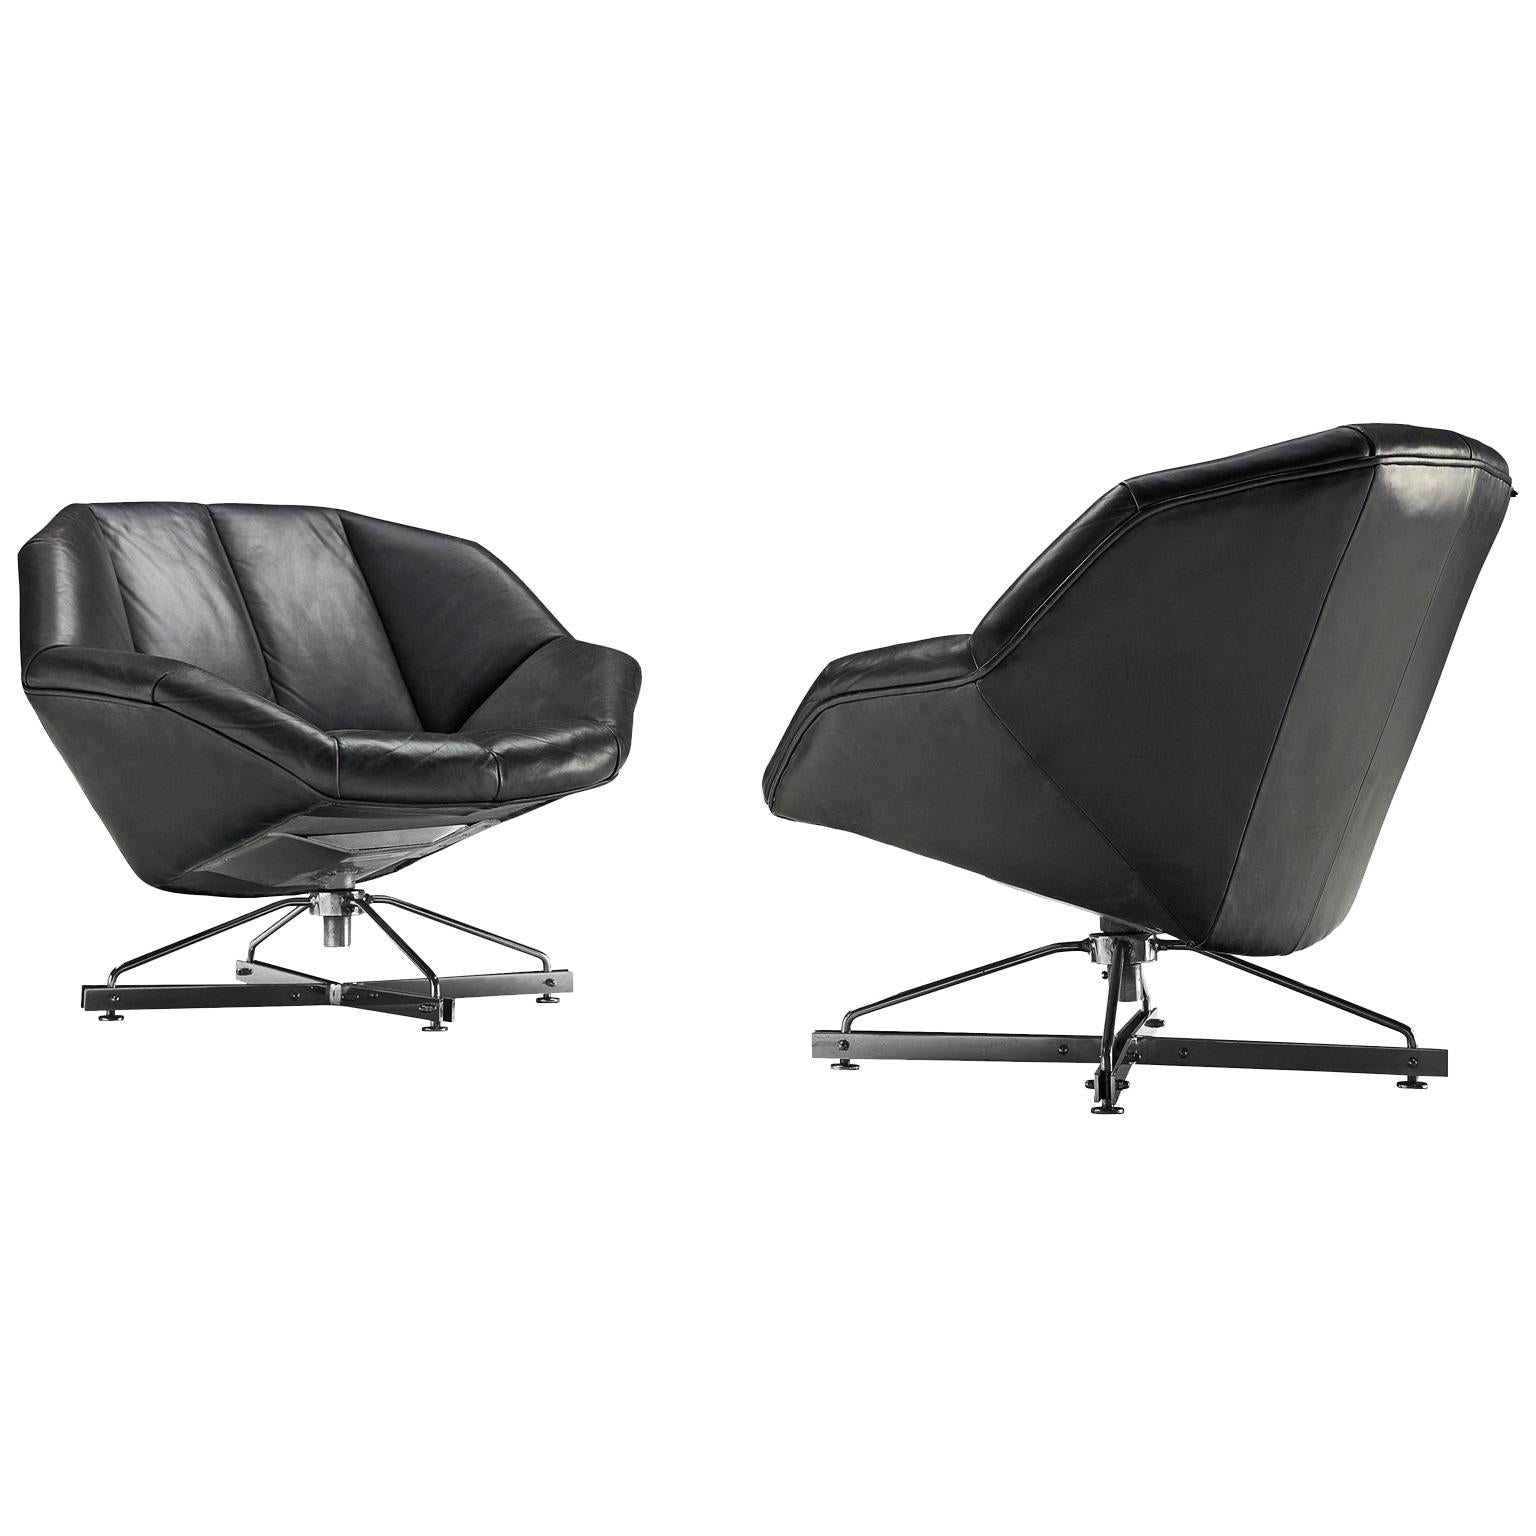 Italian Pair of Swivel Chairs in Black Leather